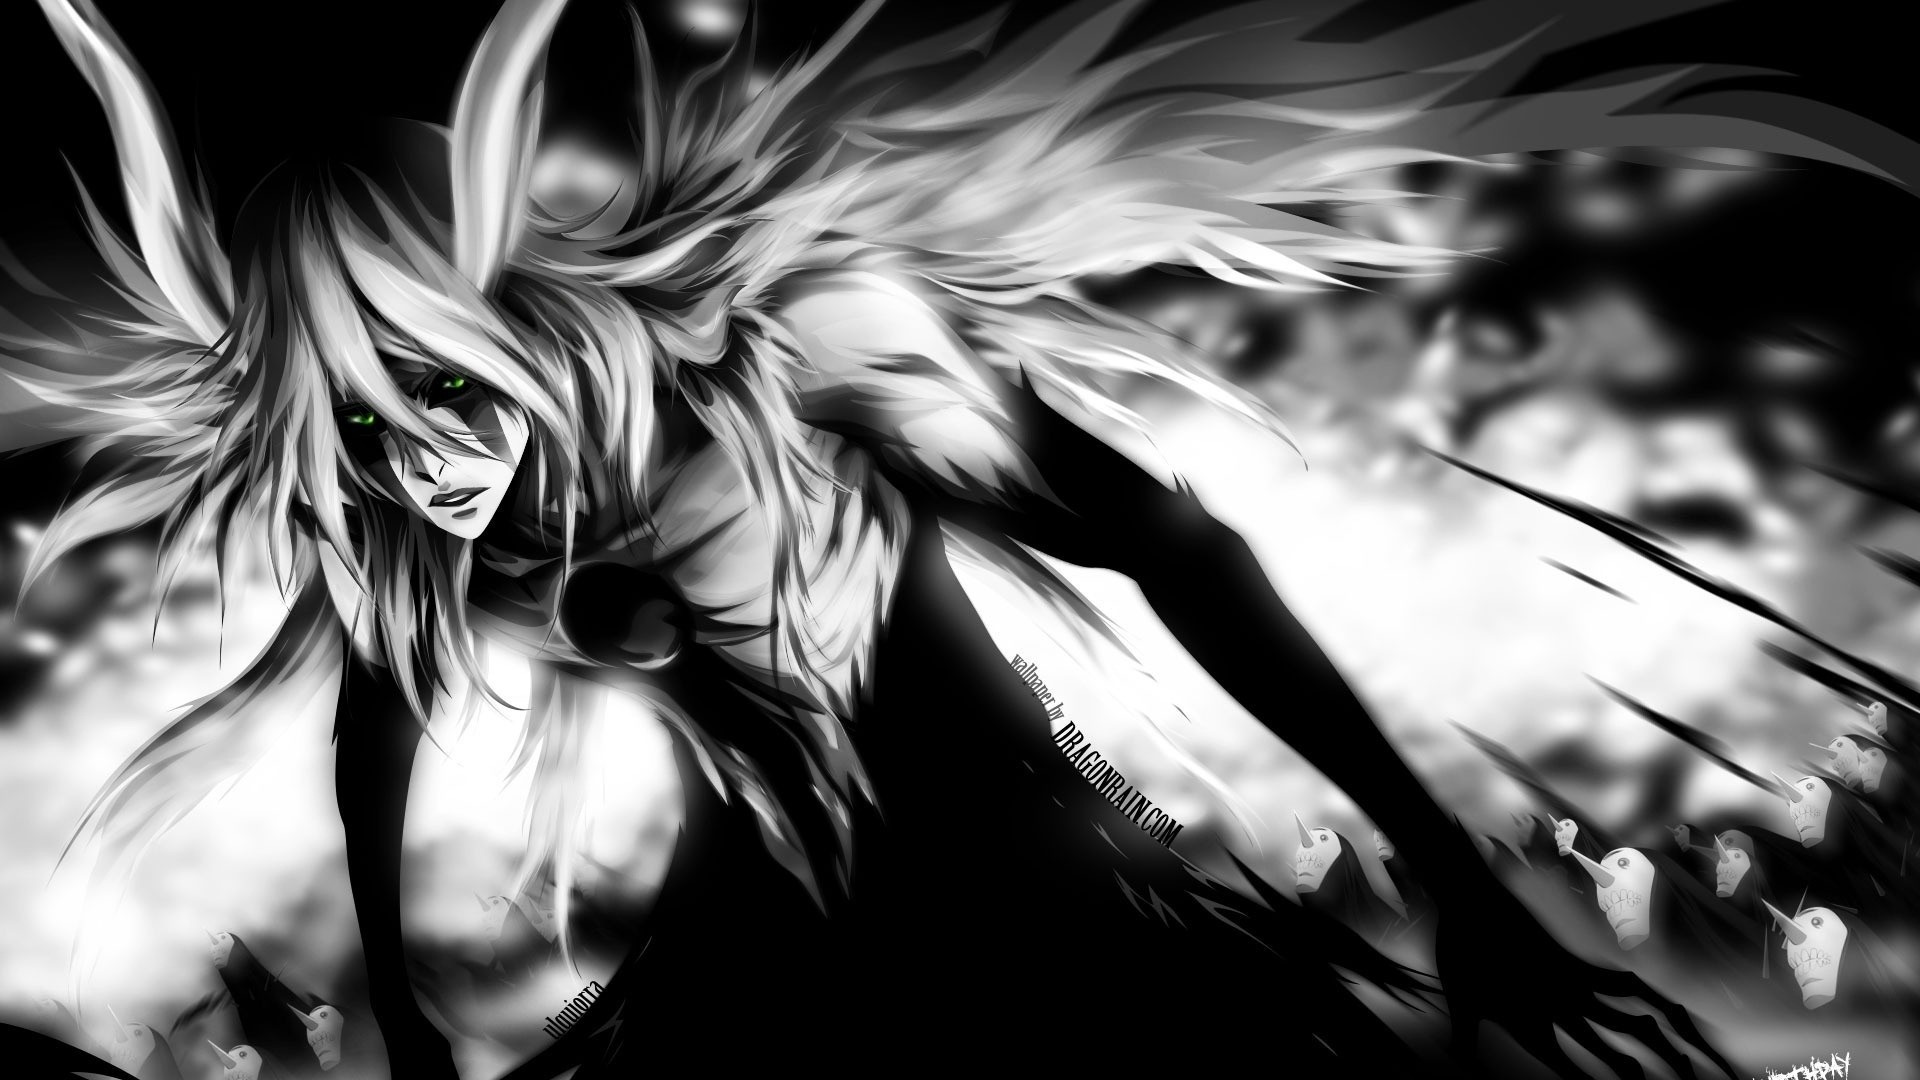 1920x1080 Bleach Wallpapers For Android WallpaperPulse Cool Bleach Backgrounds  Wallpapers)